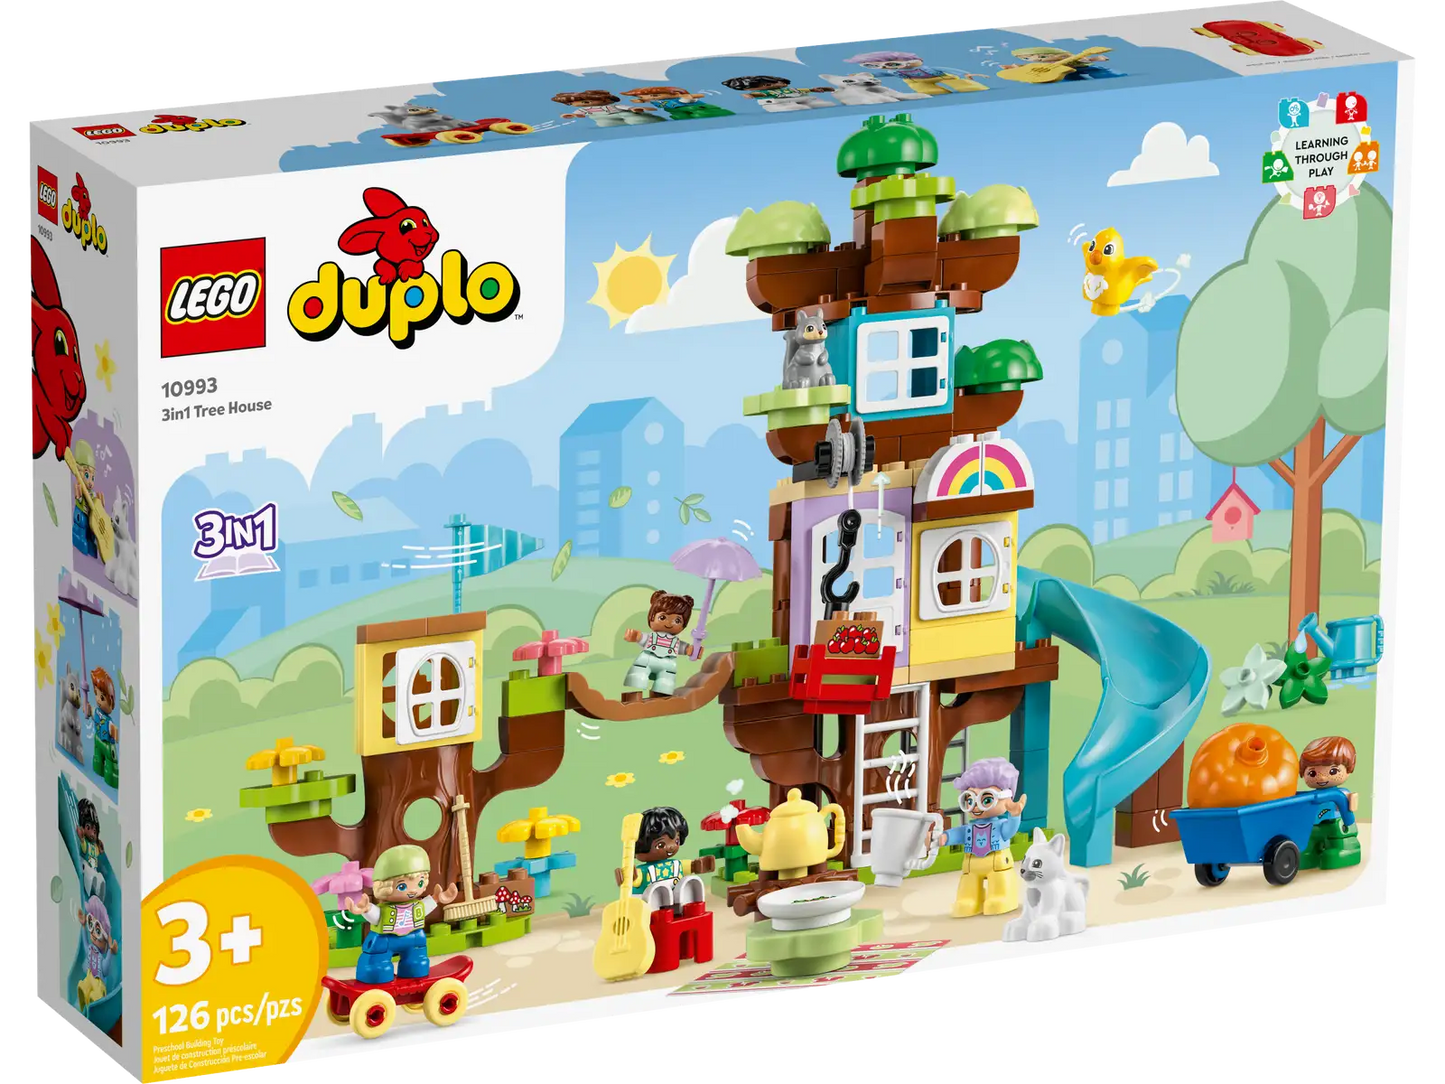 Duplo 3in1 Tree House